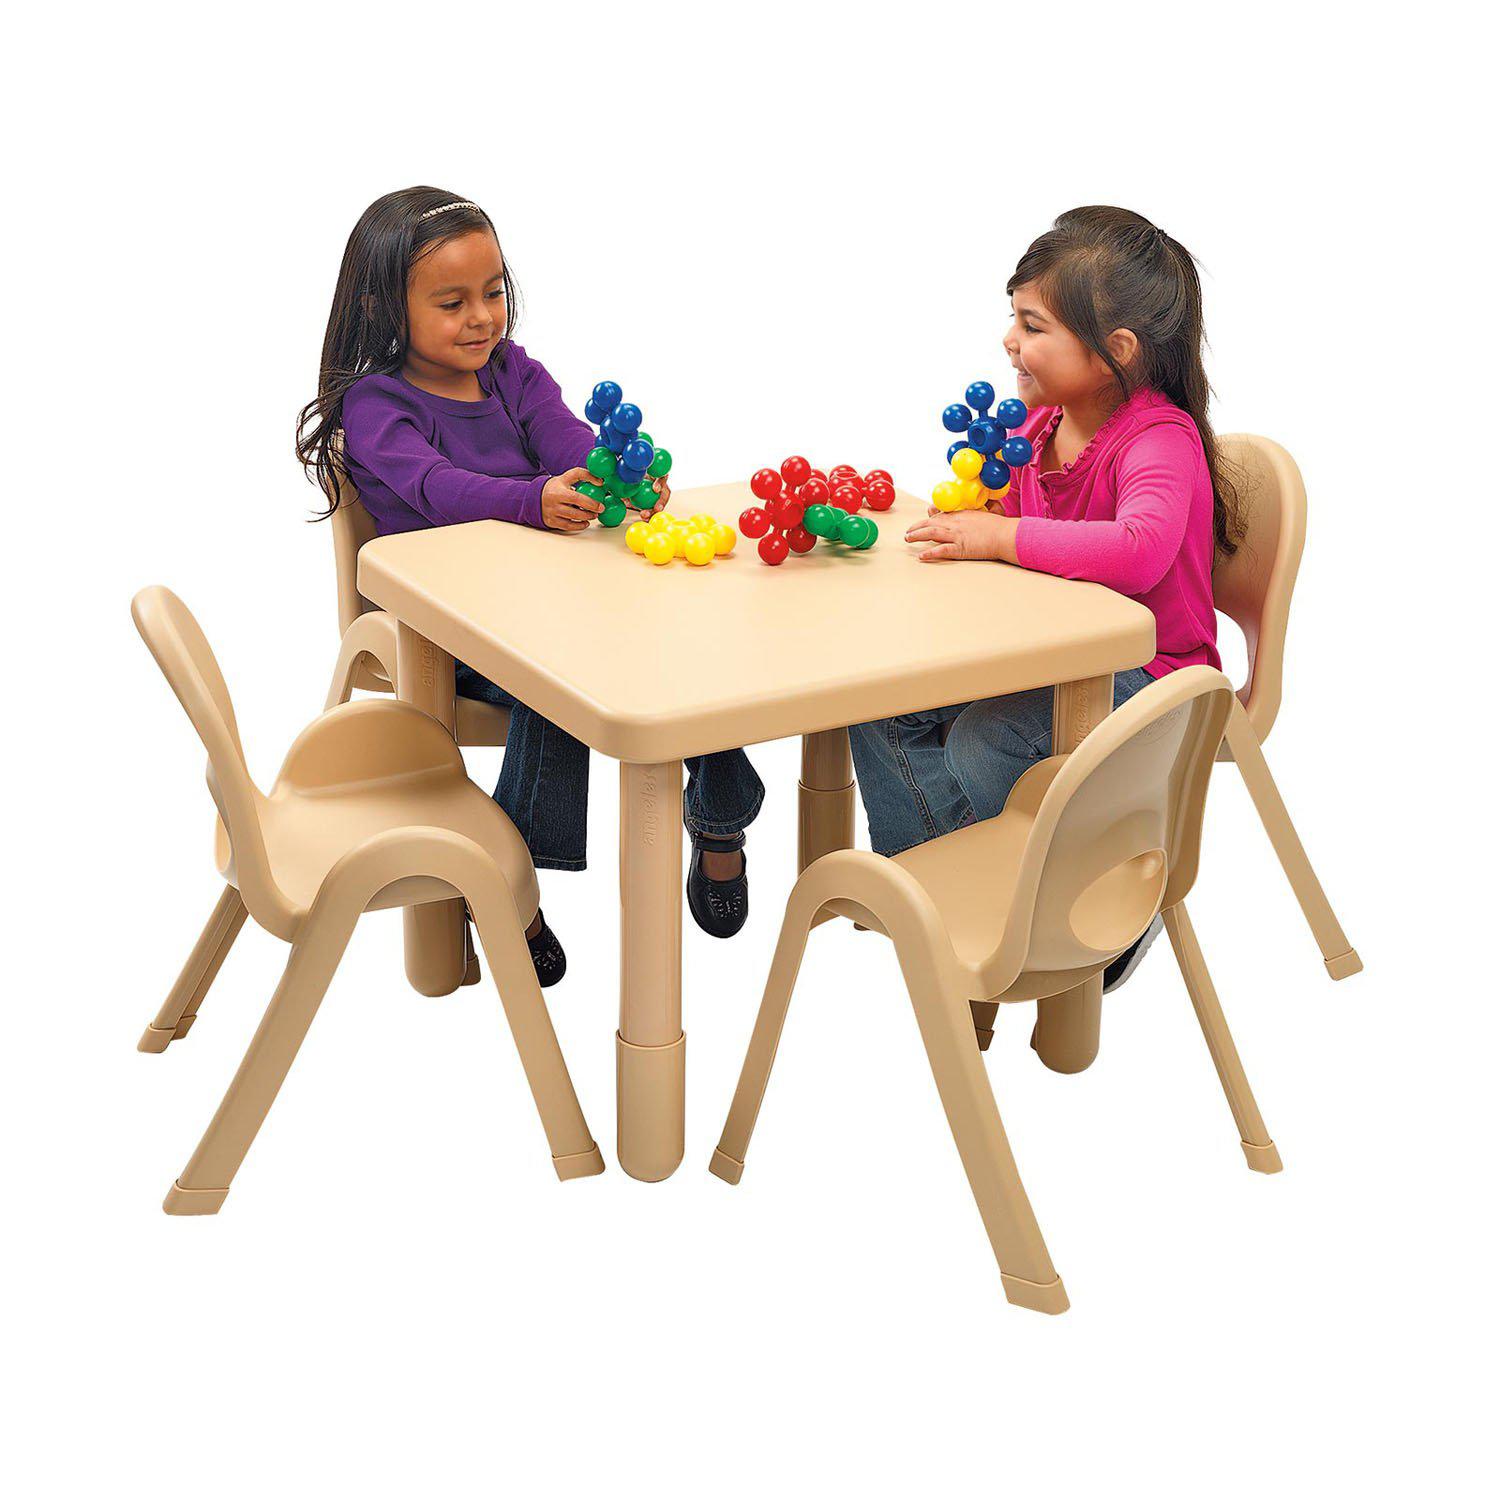 Toddler MyValue™ Table and Chair Set - 28" Square x 20"-High Natural Tan Table with 4 Matching 11"-High Chairs